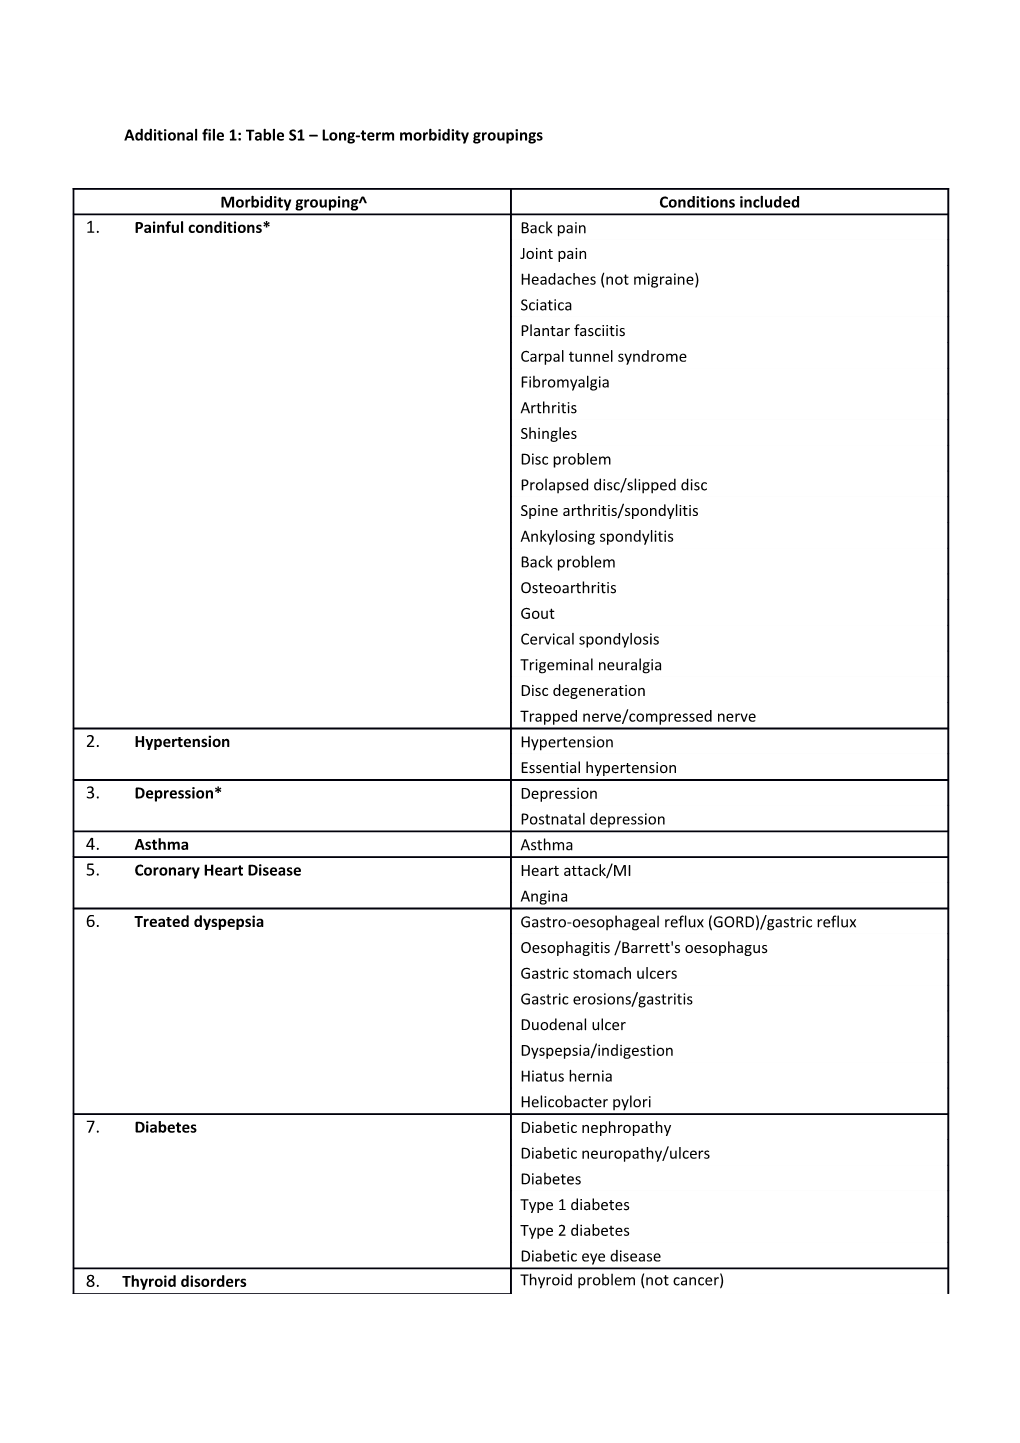 Additional File 1: Table S1 Long-Term Morbidity Groupings